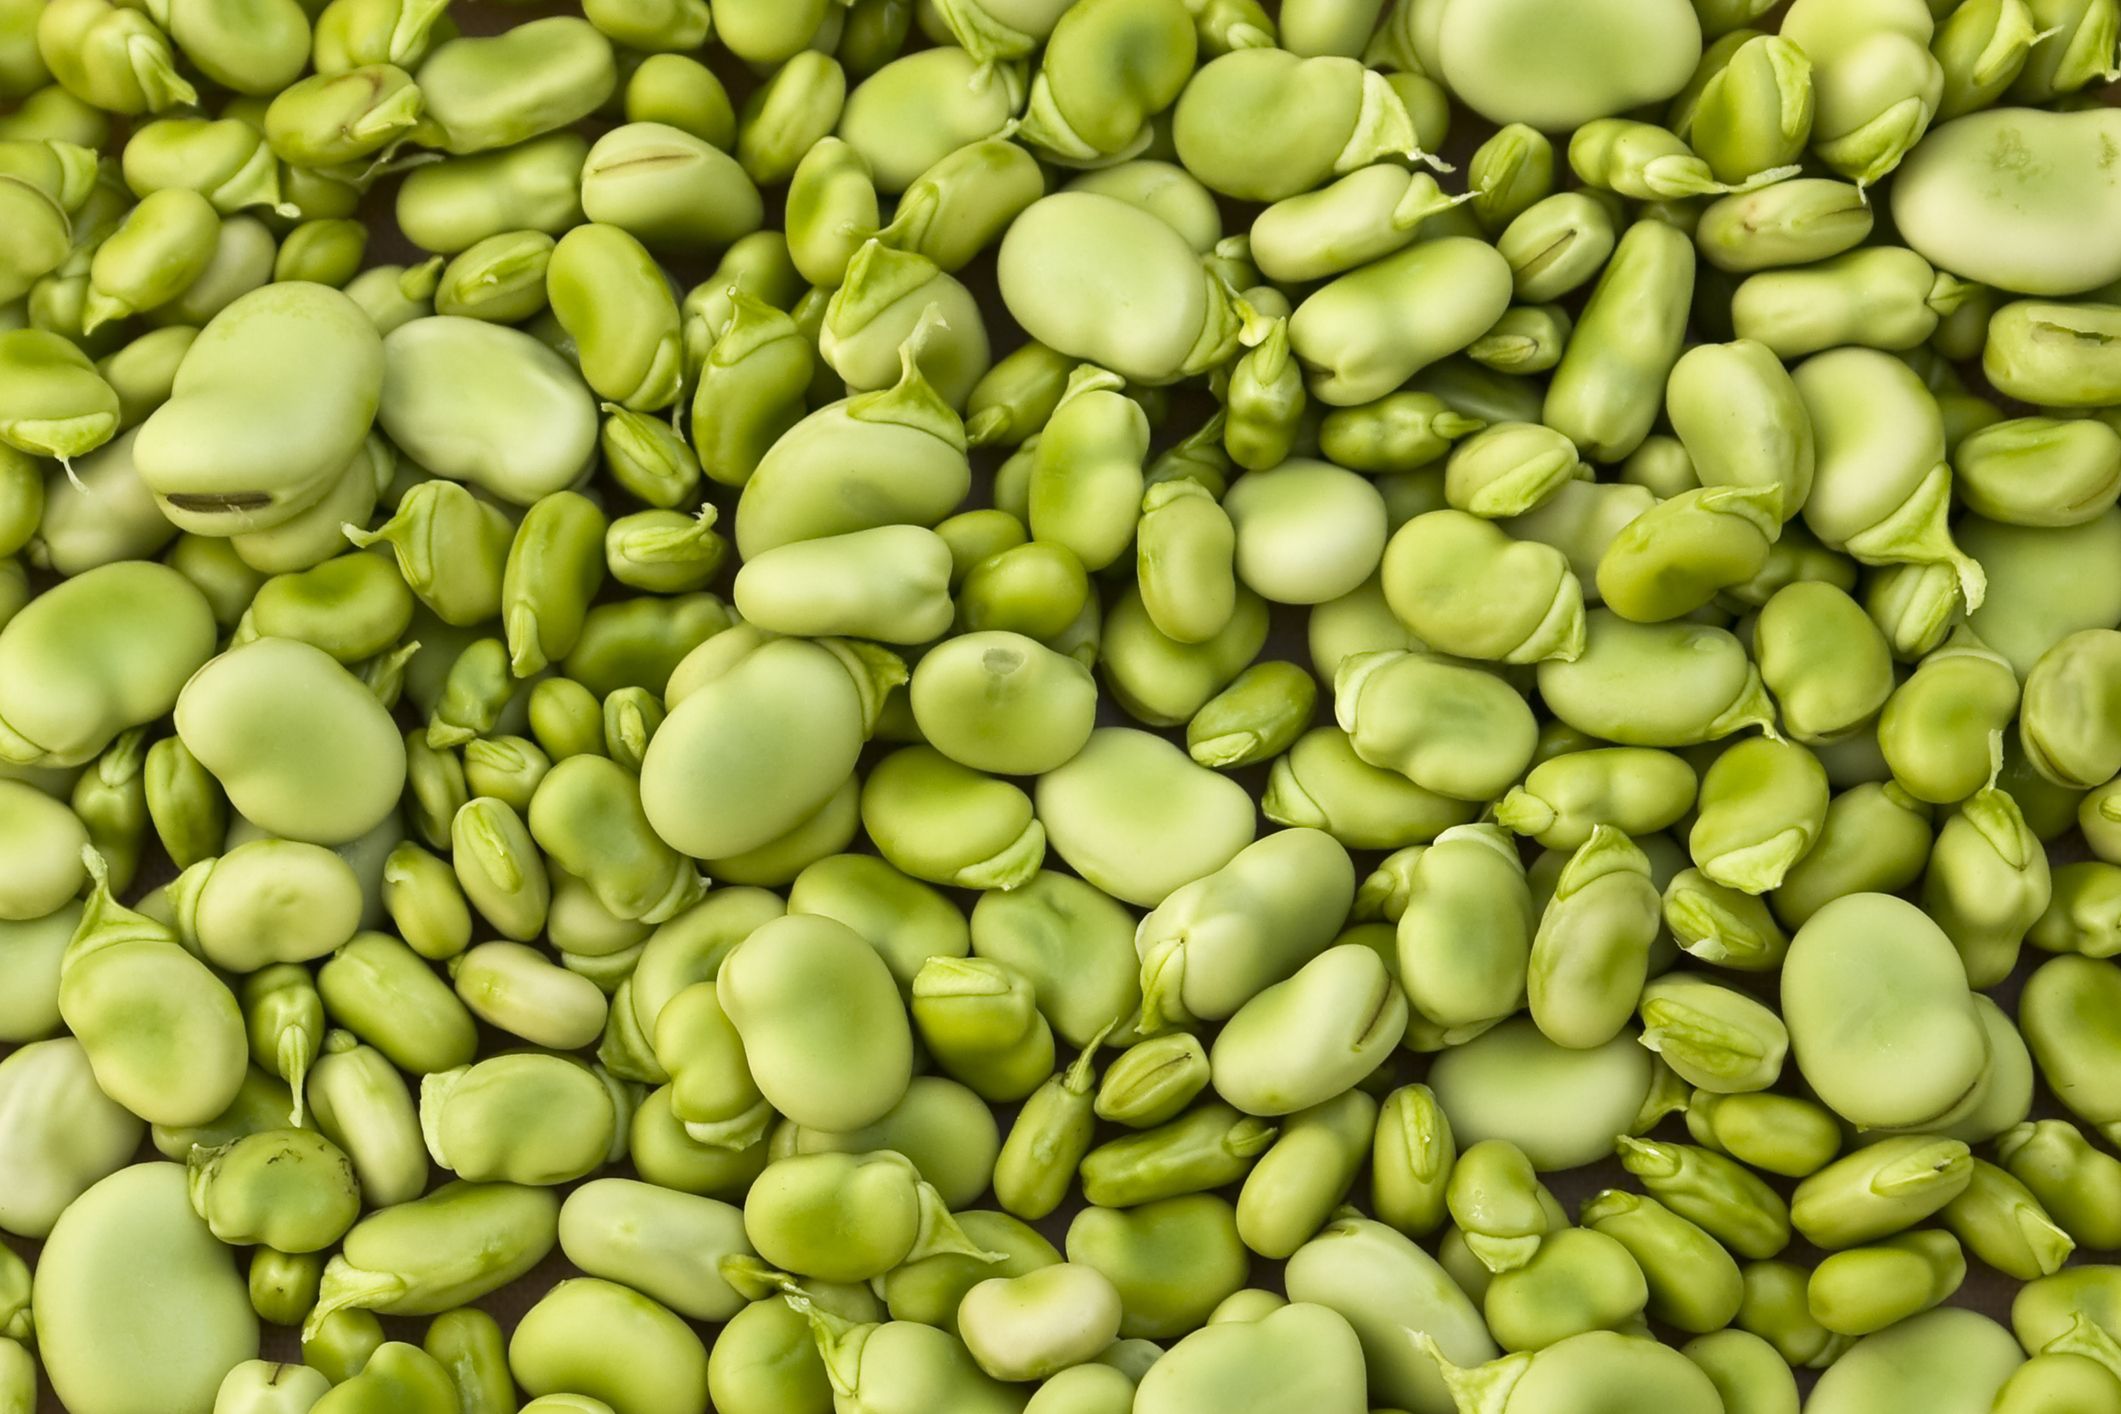 Nutritious healthy lima beans are the stuff of musicals.